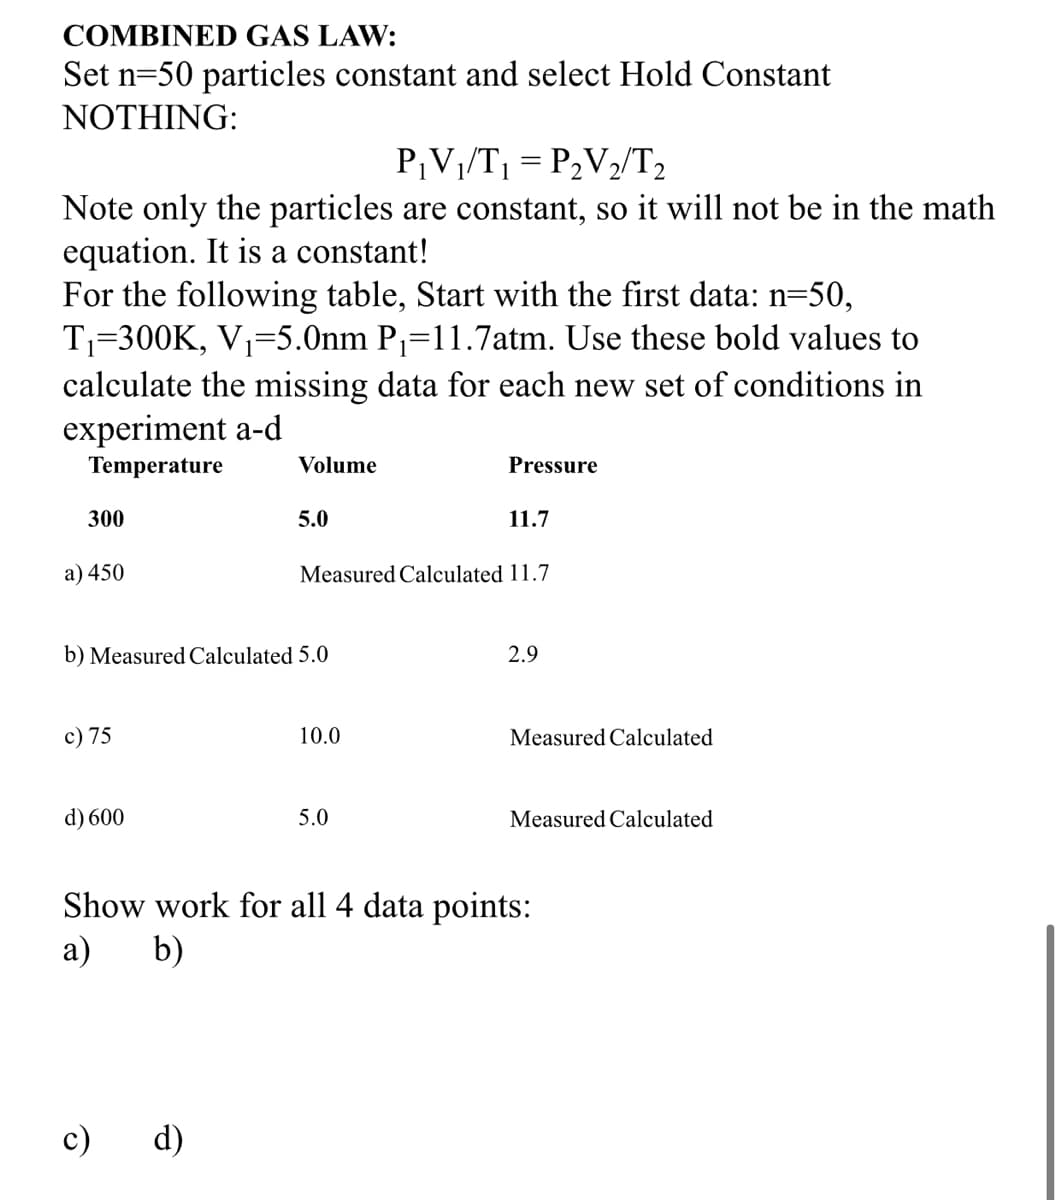 COMBINED GAS LAW:
Set n=50 particles constant and select Hold Constant
NOTHING:
P¡V1/T1 = P2V2/T2
Note only the particles are constant, so it will not be in the math
equation. It is a constant!
For the following table, Start with the first data: n=50,
T1=300K, V1=5.0nm P=11.7atm. Use these bold values to
calculate the missing data for each new set of conditions in
experiment a-d
Temperature
Volume
Pressure
300
5.0
11.7
a) 450
Measured Calculated 11.7
b) Measured Calculated 5.0
2.9
c) 75
10.0
Measured Calculated
d) 600
5.0
Measured Calculated
Show work for all 4 data points:
a)
b)
c) d)
